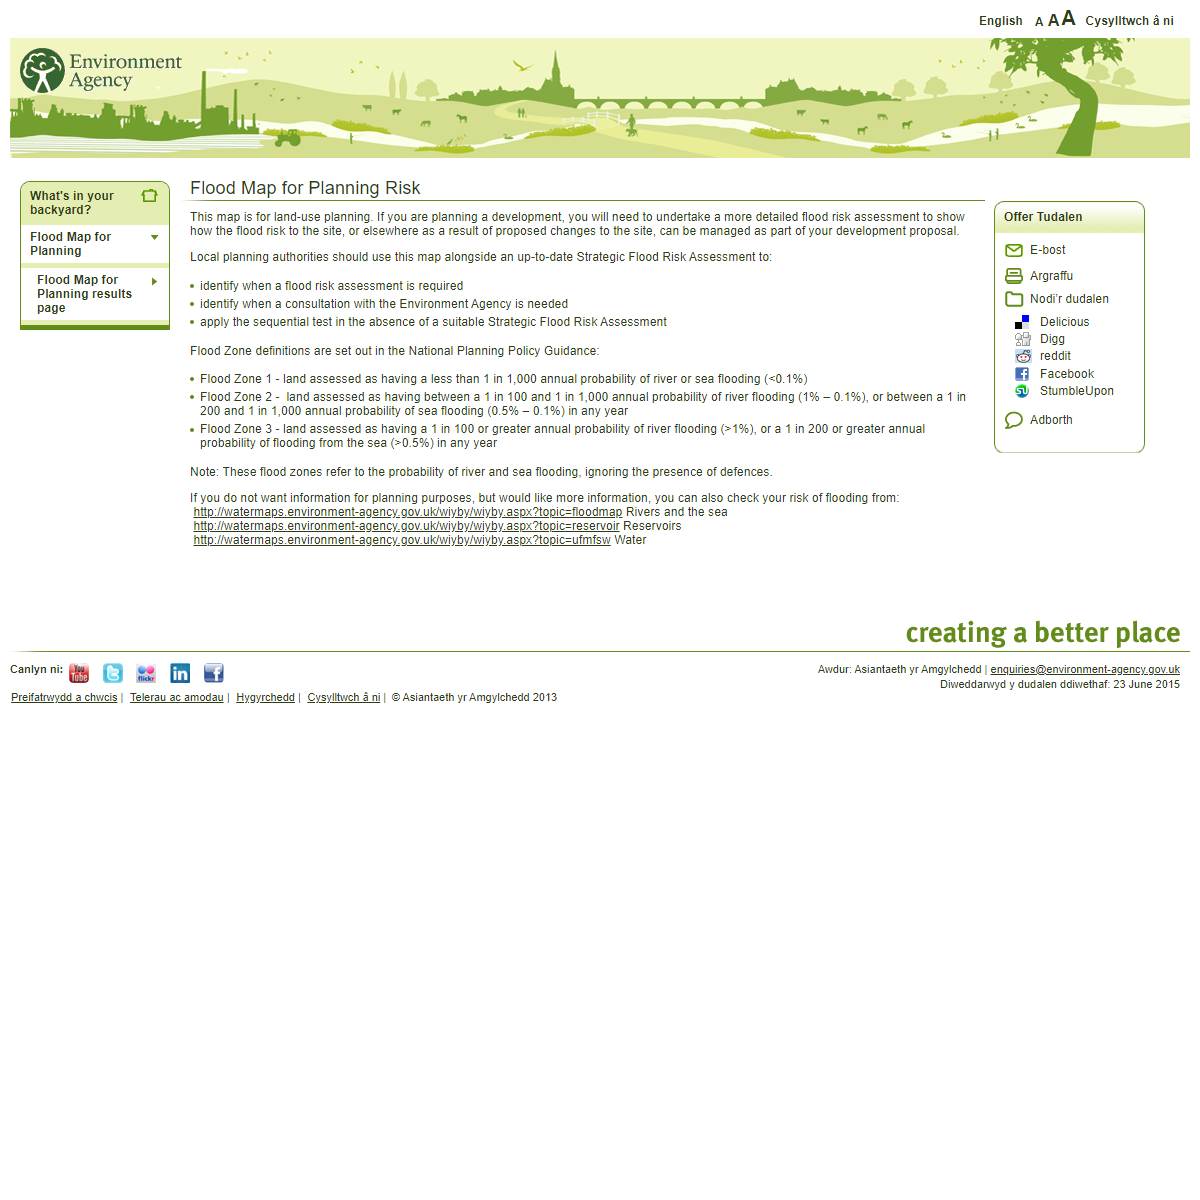 A complete backup of http://apps.environment-agency.gov.uk/wiyby/cy/151263.aspx